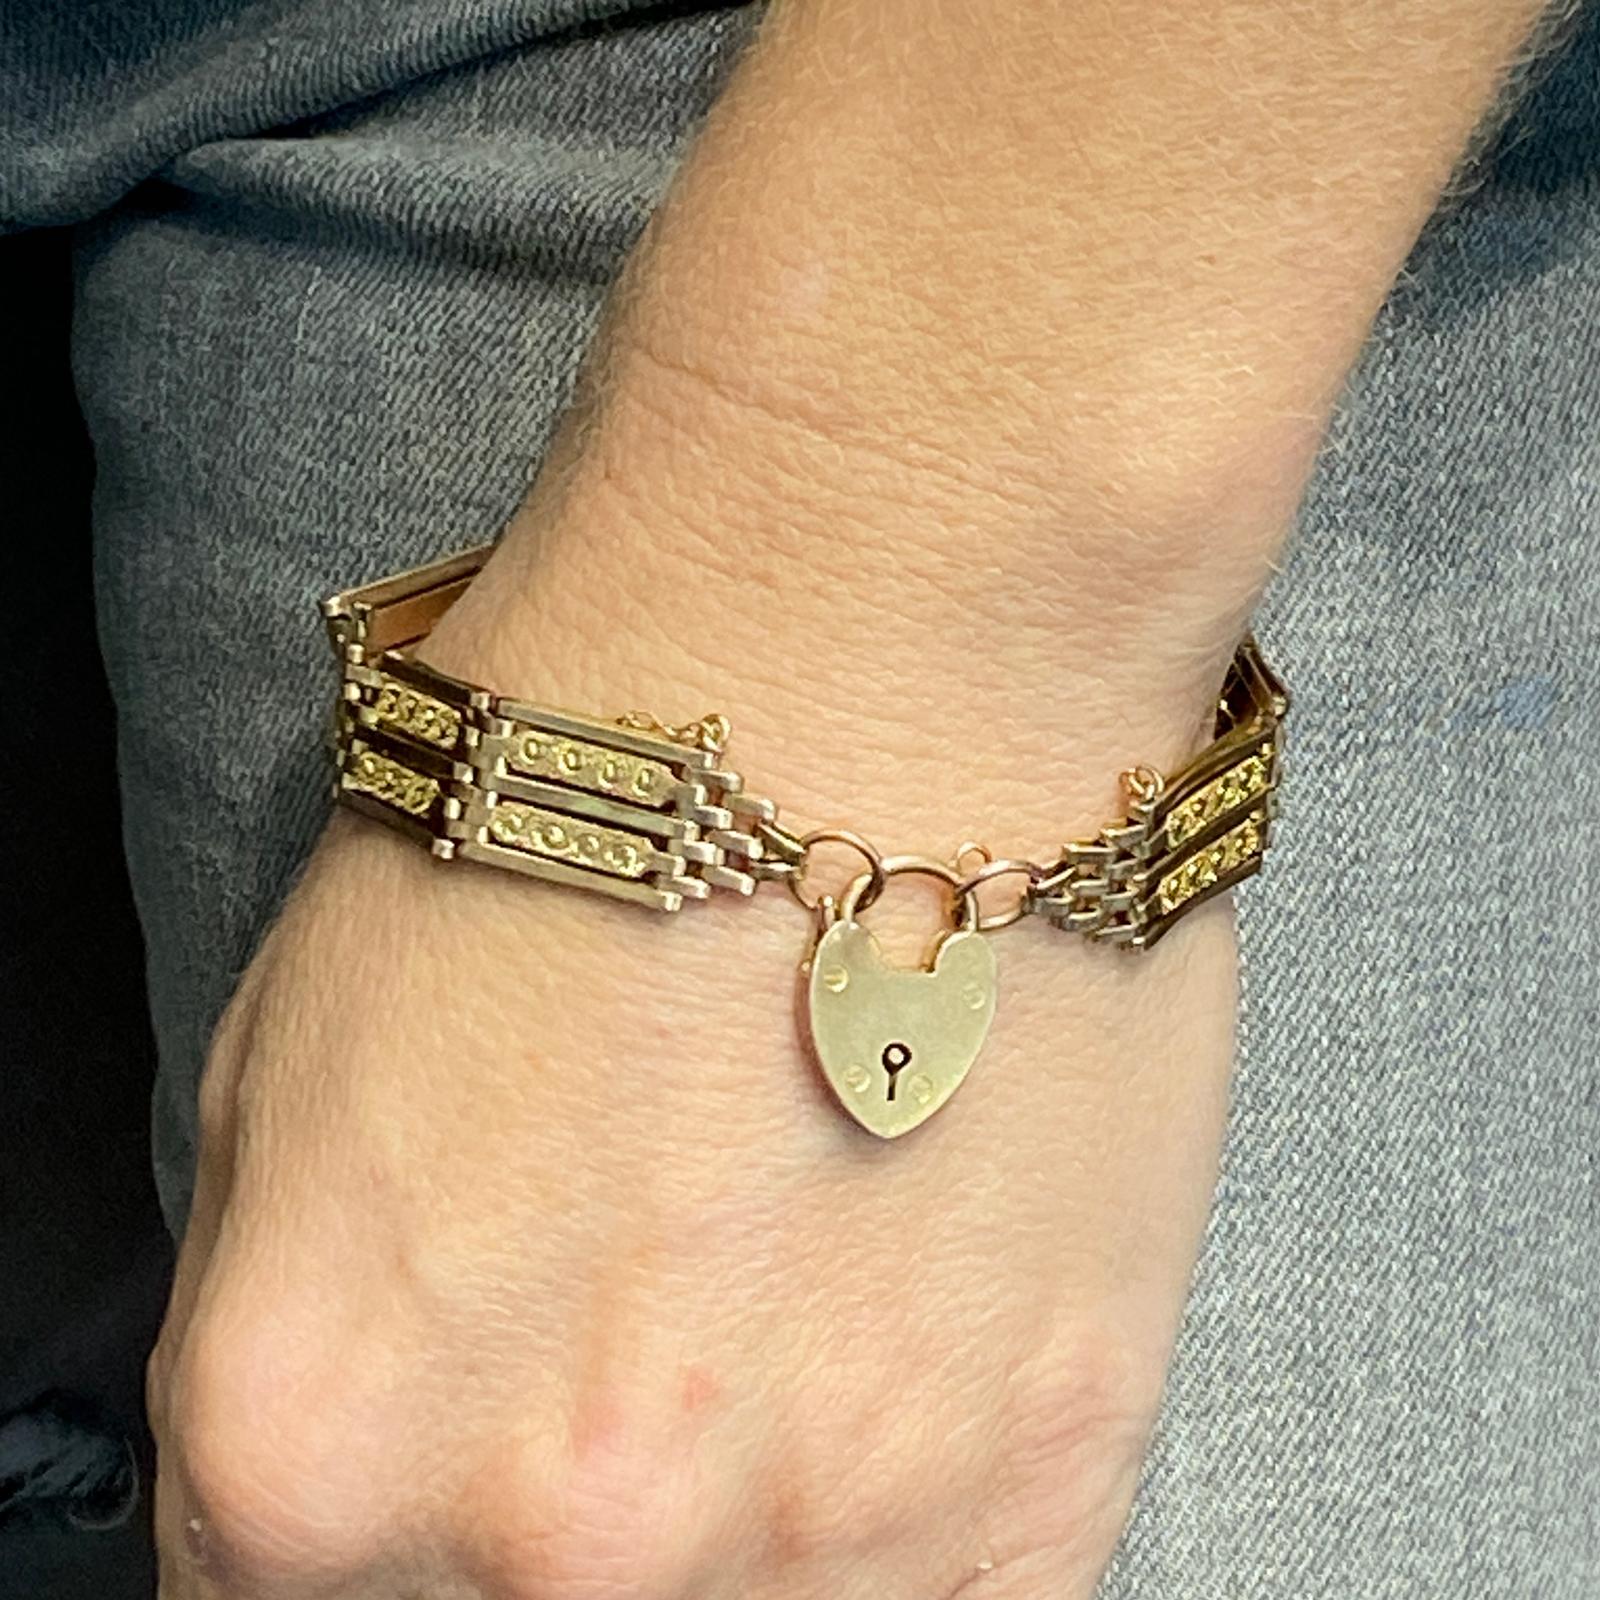 Original heart lock Victorian bracelet fashioned in 9 karat yellow gold. The gate links measure .50 inches in width, and the bracelet measures 7.0 inches in length. The heart clasp charm secures the bracelet and dangles. 